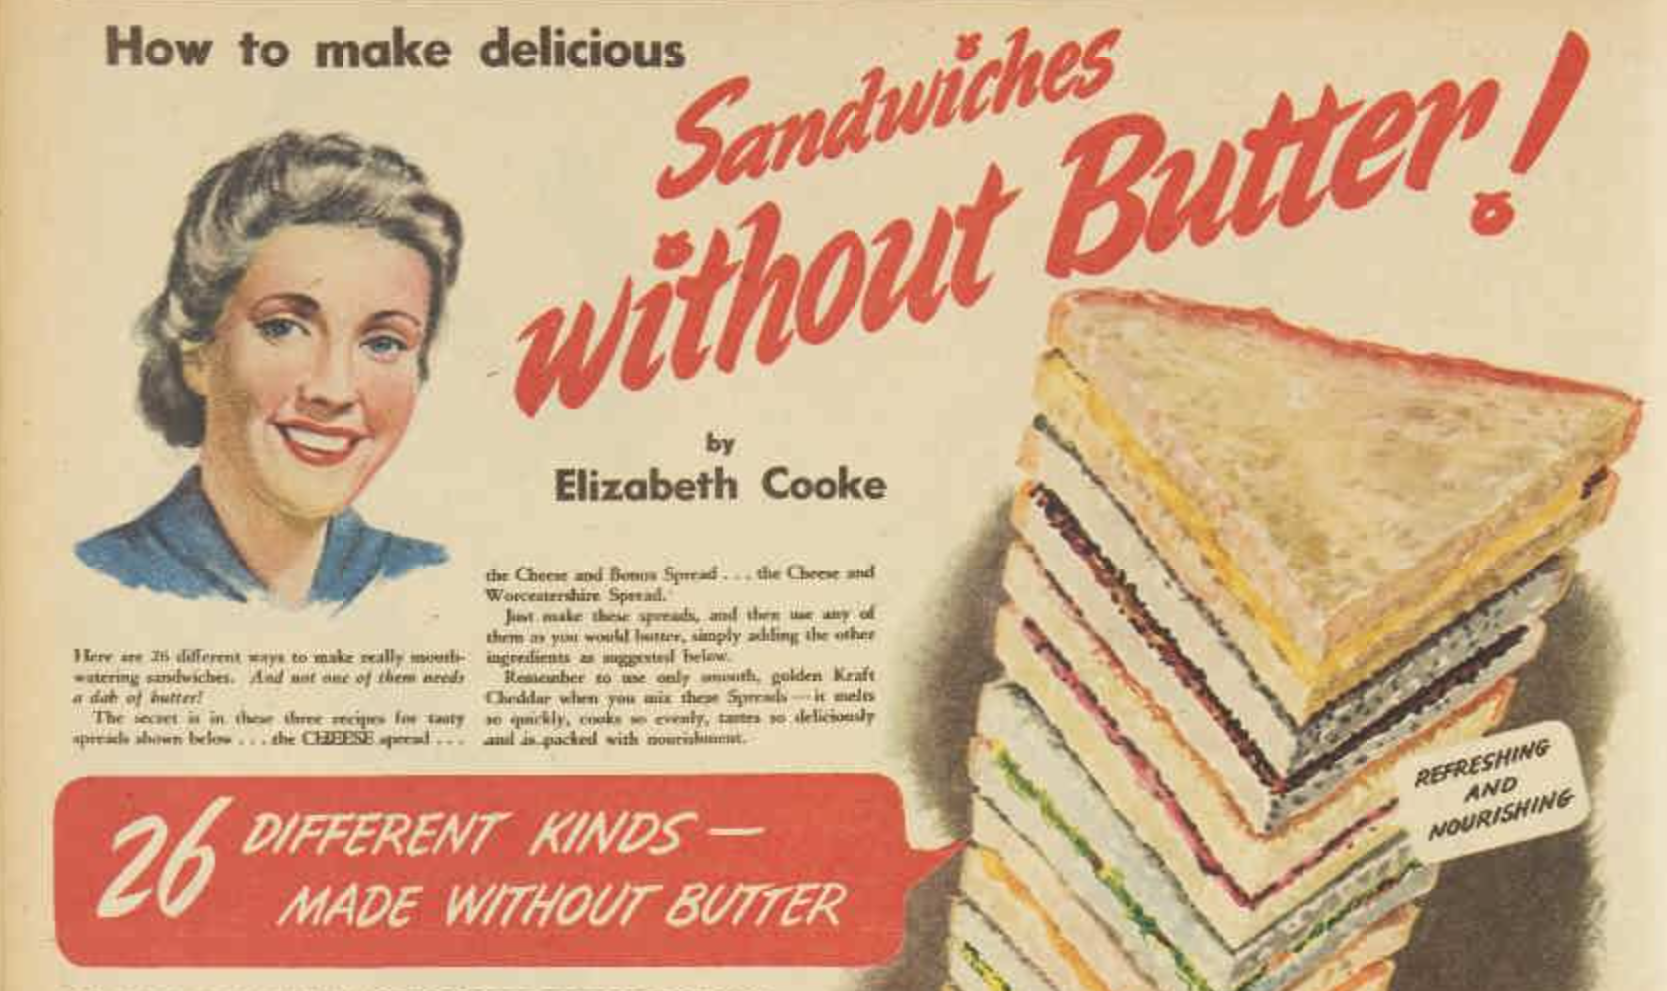 advertisement for how to make sandwiches without butter